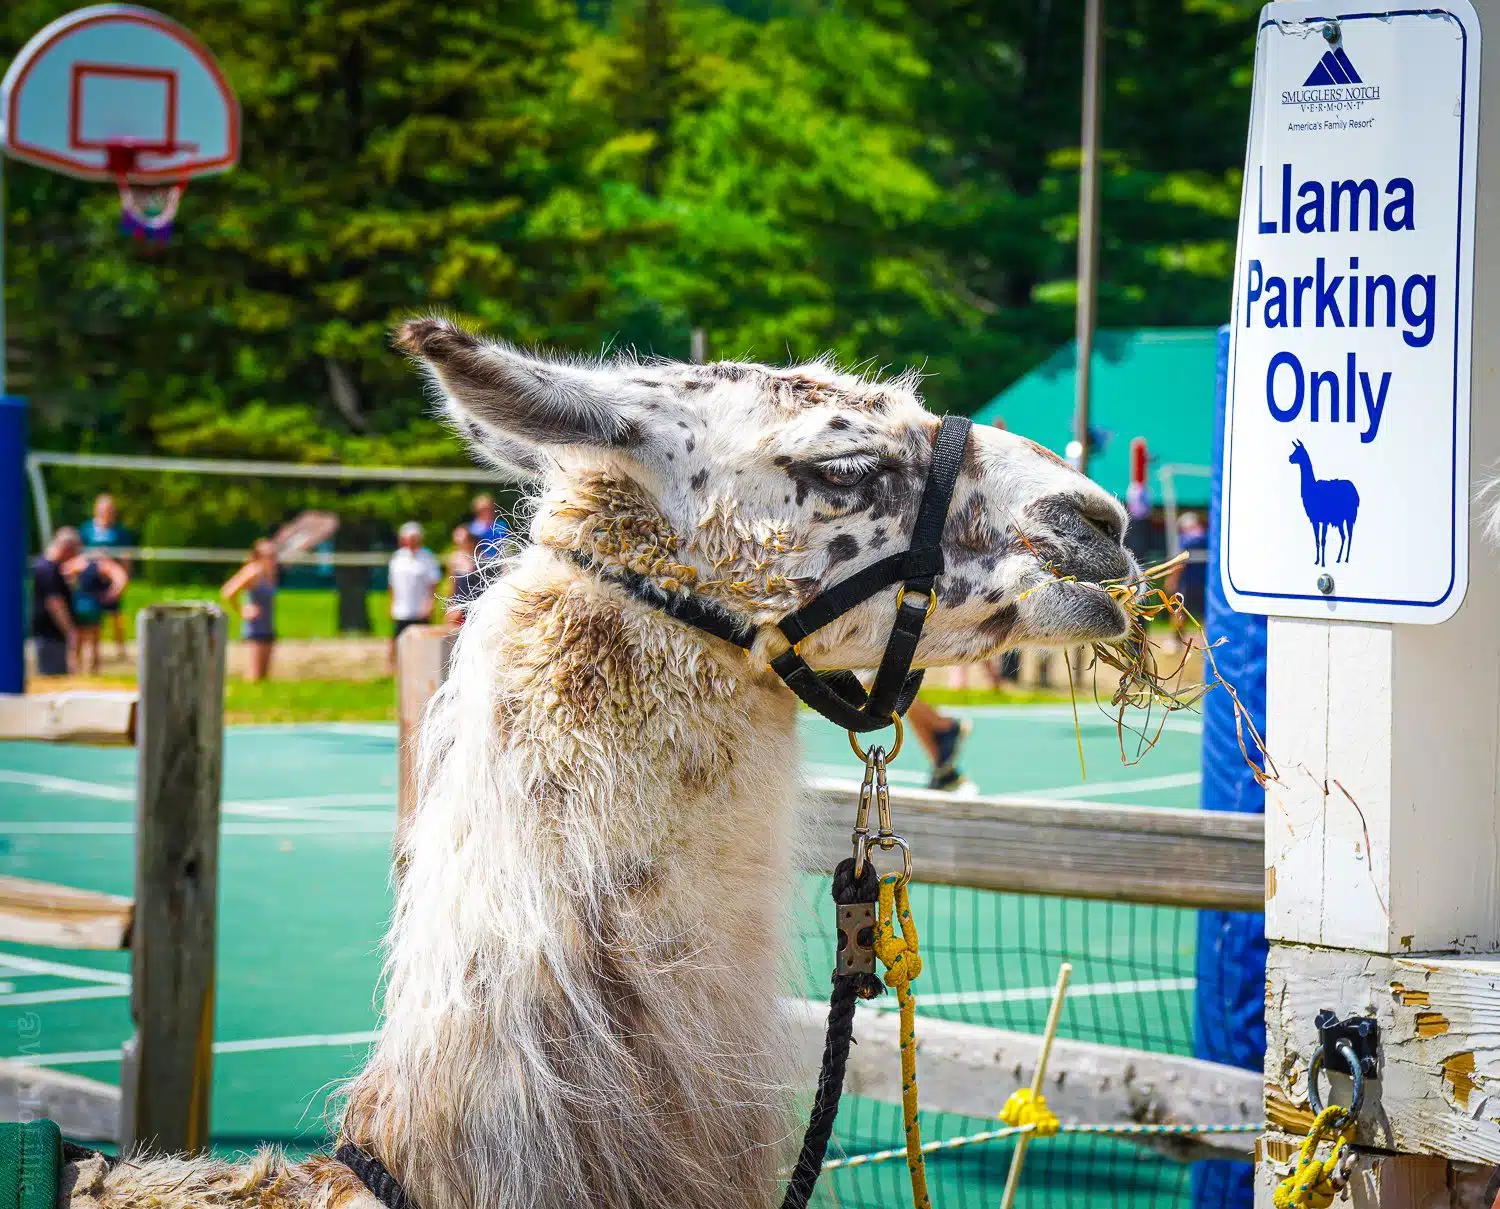 Llama Parking Only! Respect the sign.